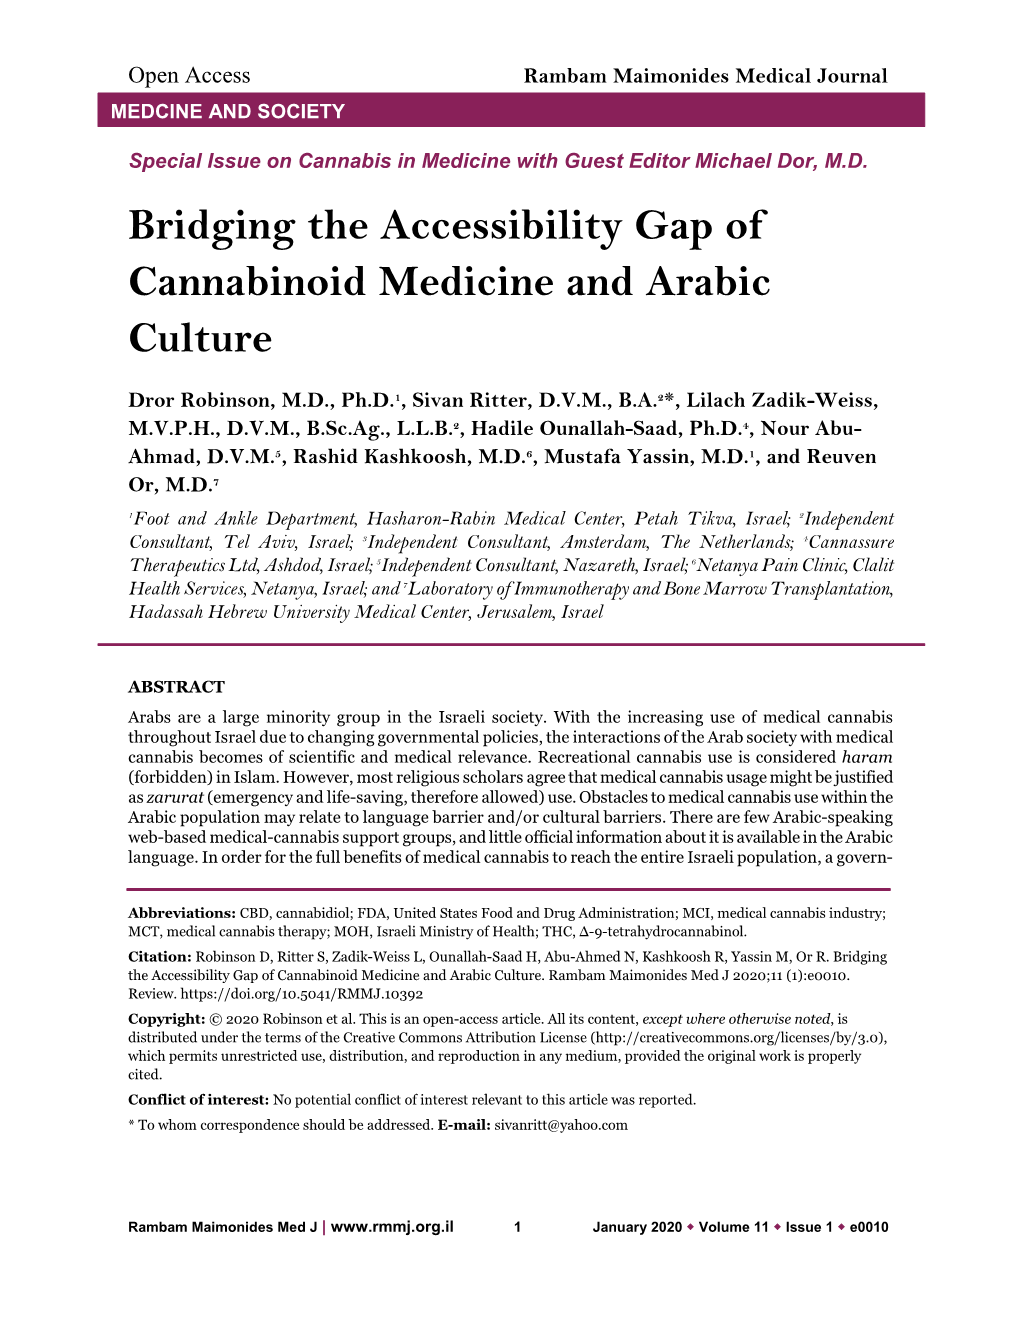 Bridging the Accessibility Gap of Cannabinoid Medicine and Arabic Culture